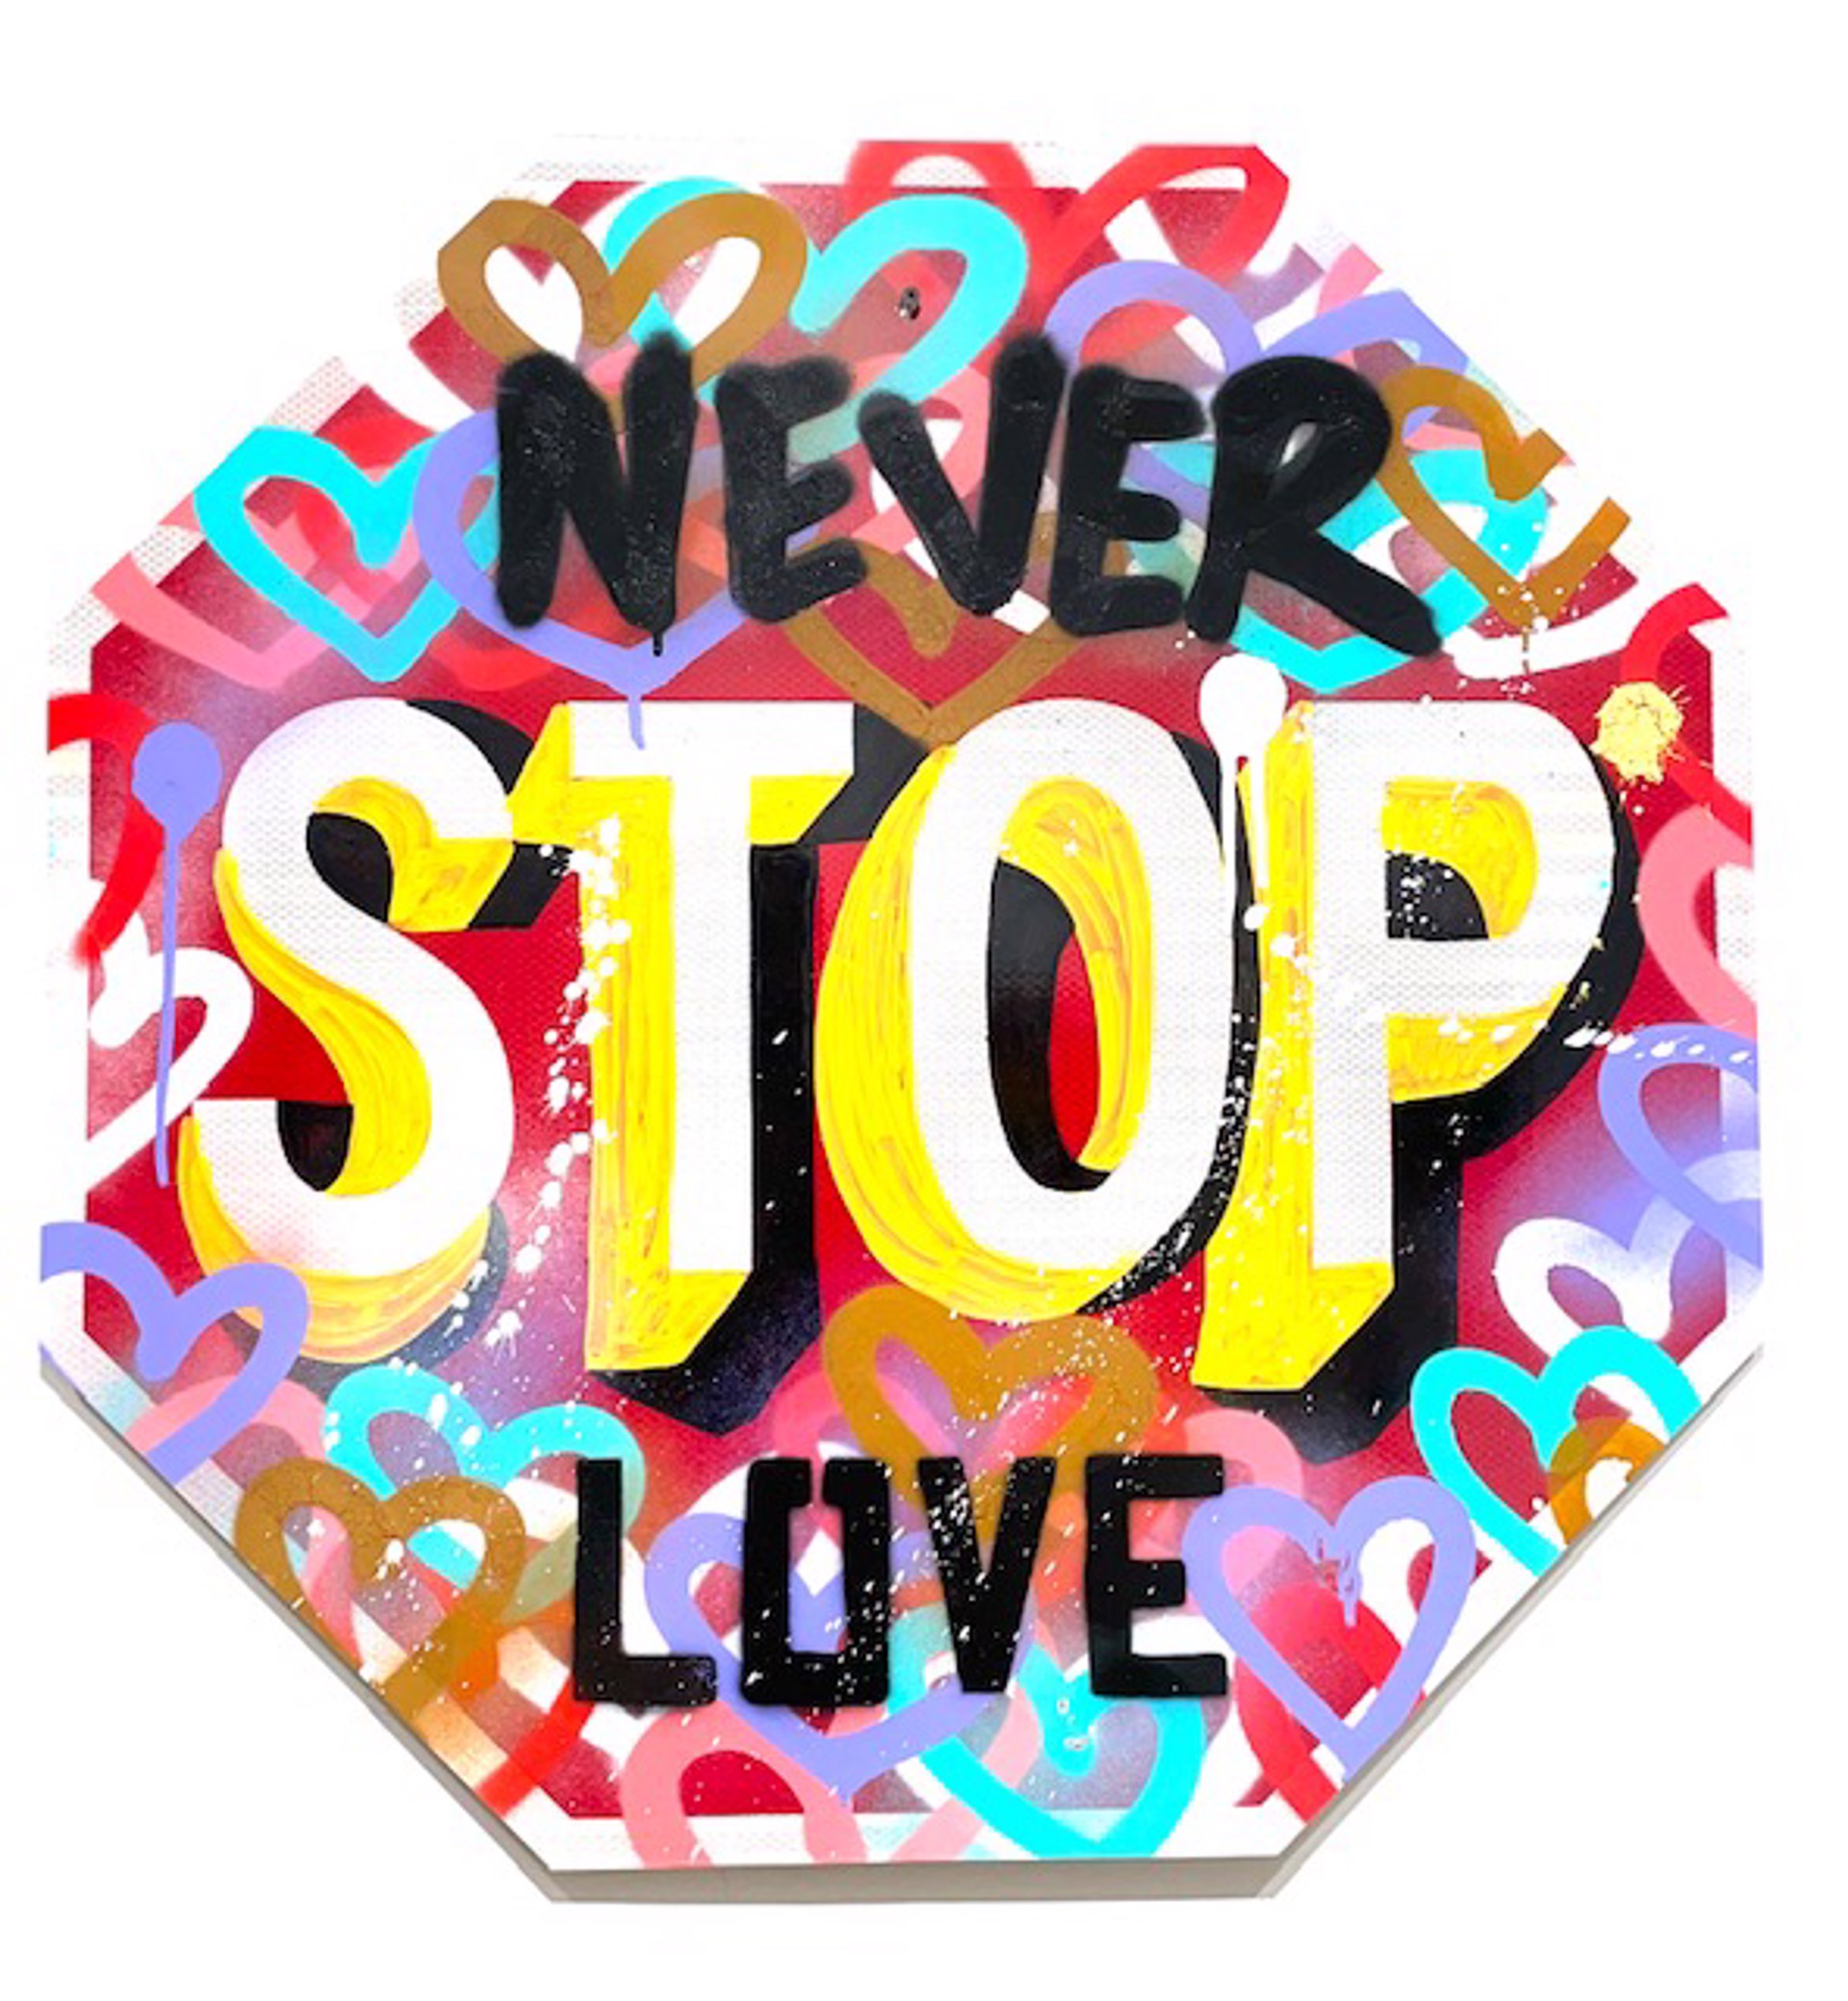 Never Stop Love by HEKTAD